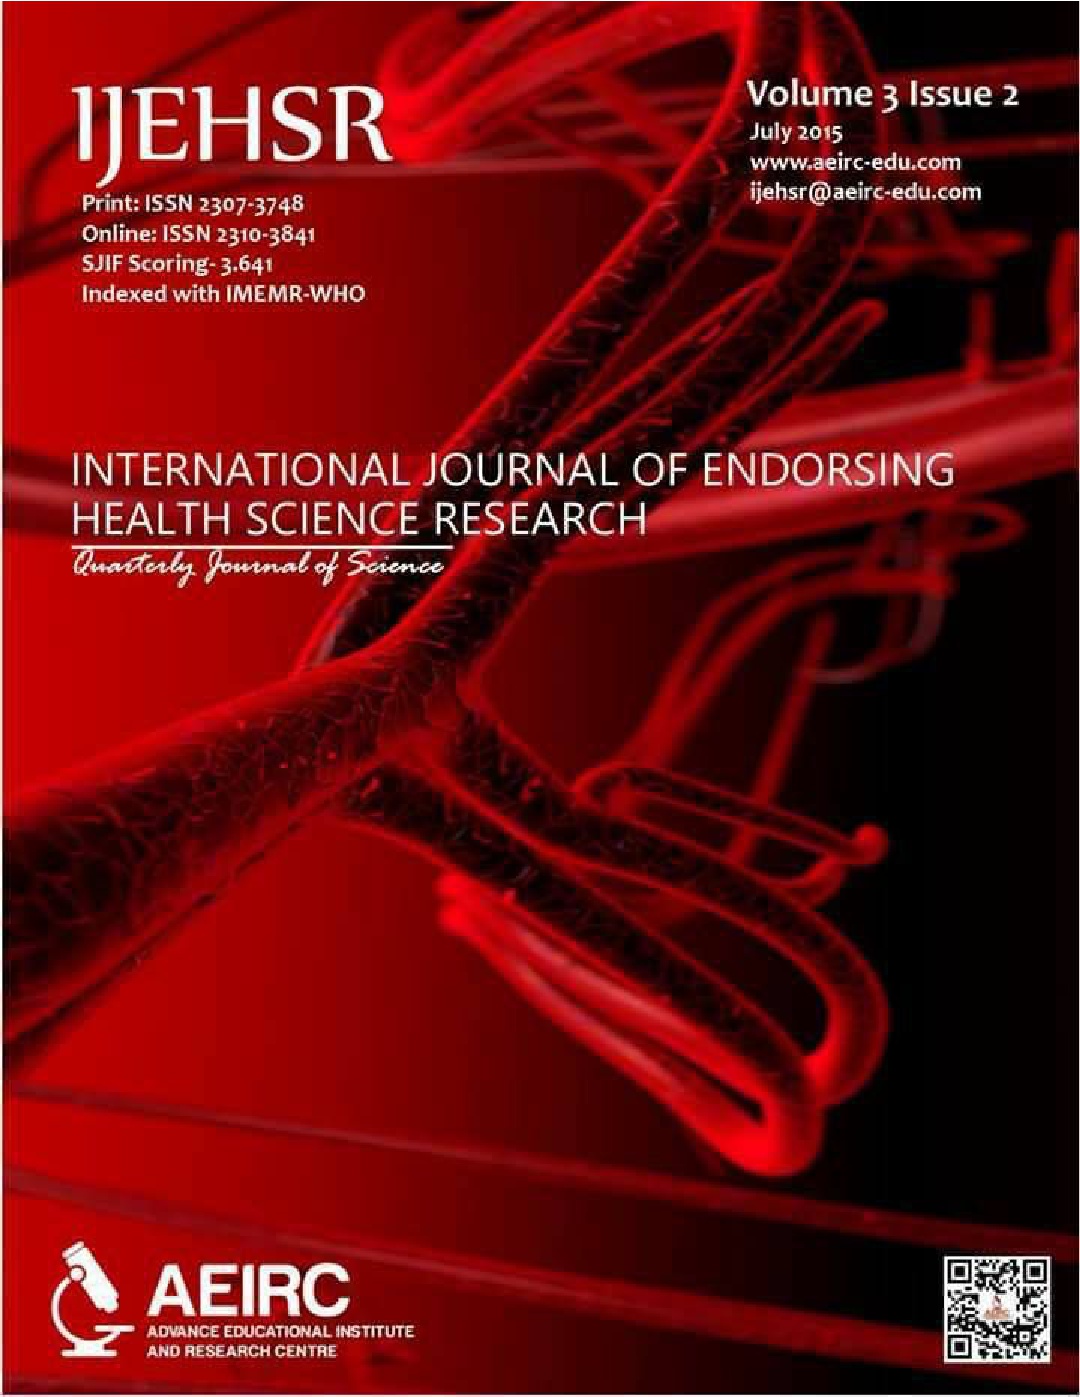 					View Vol. 3 No. 2 (2015): International Journal of Endorsing Health Science Research
				